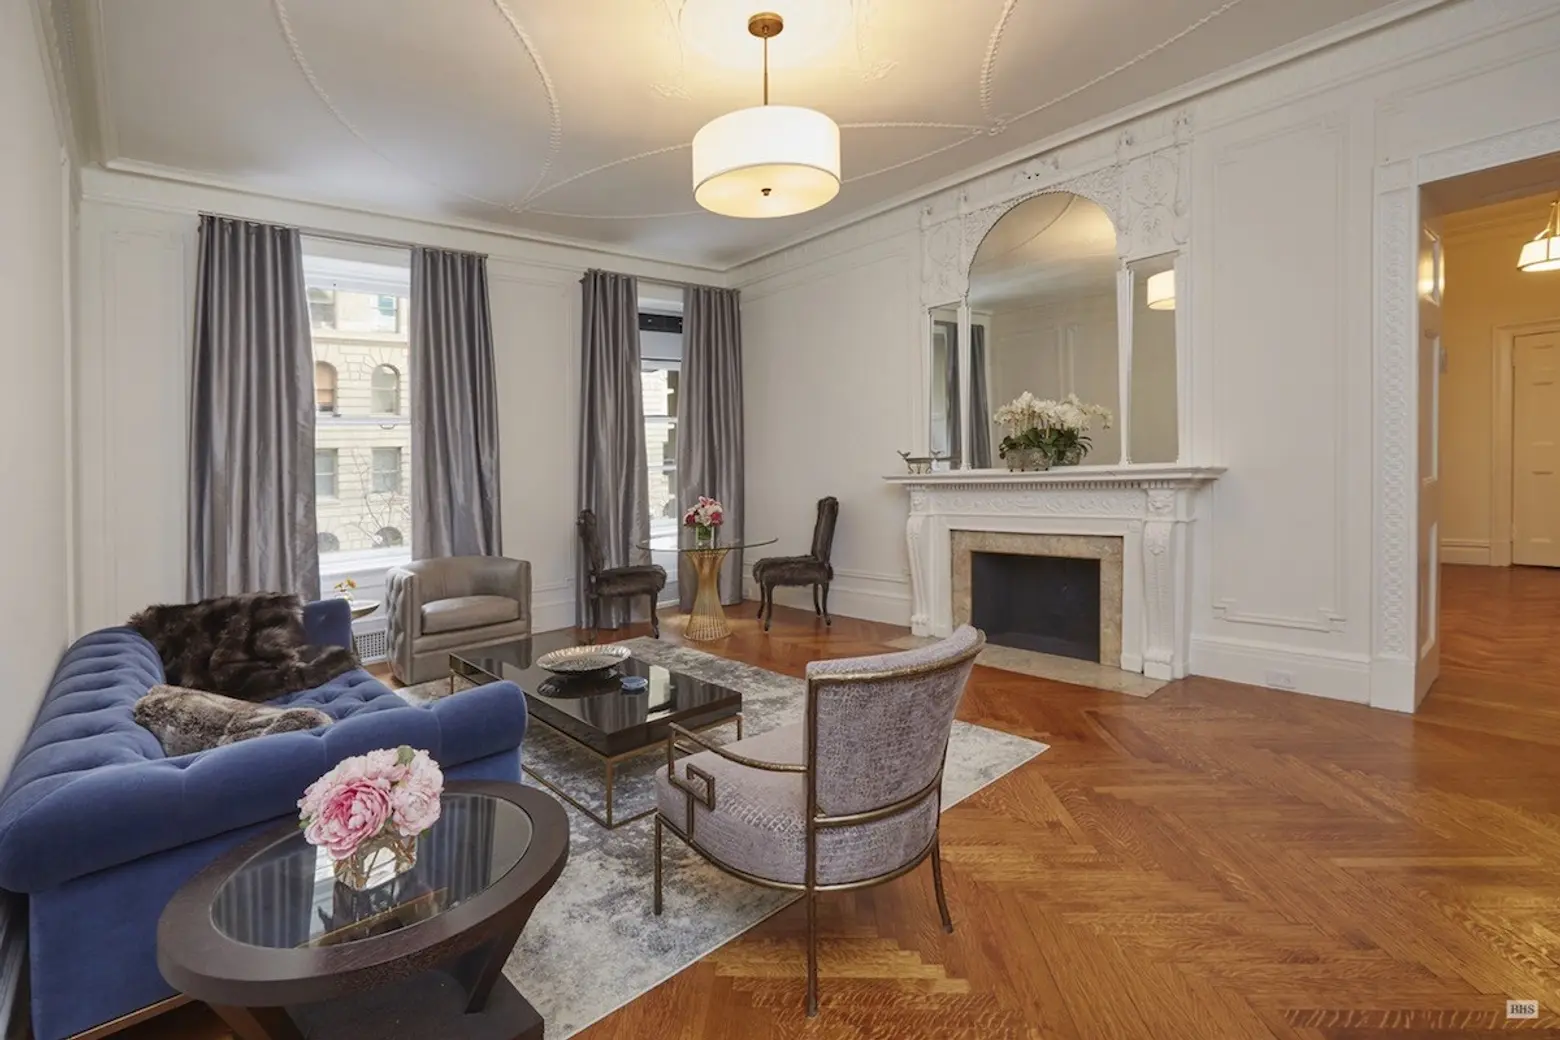 390 West End Avenue, Apthorp, Upper West Side, William Waldorf Astor, condo conversions, condominiums, most expensive, cool listings